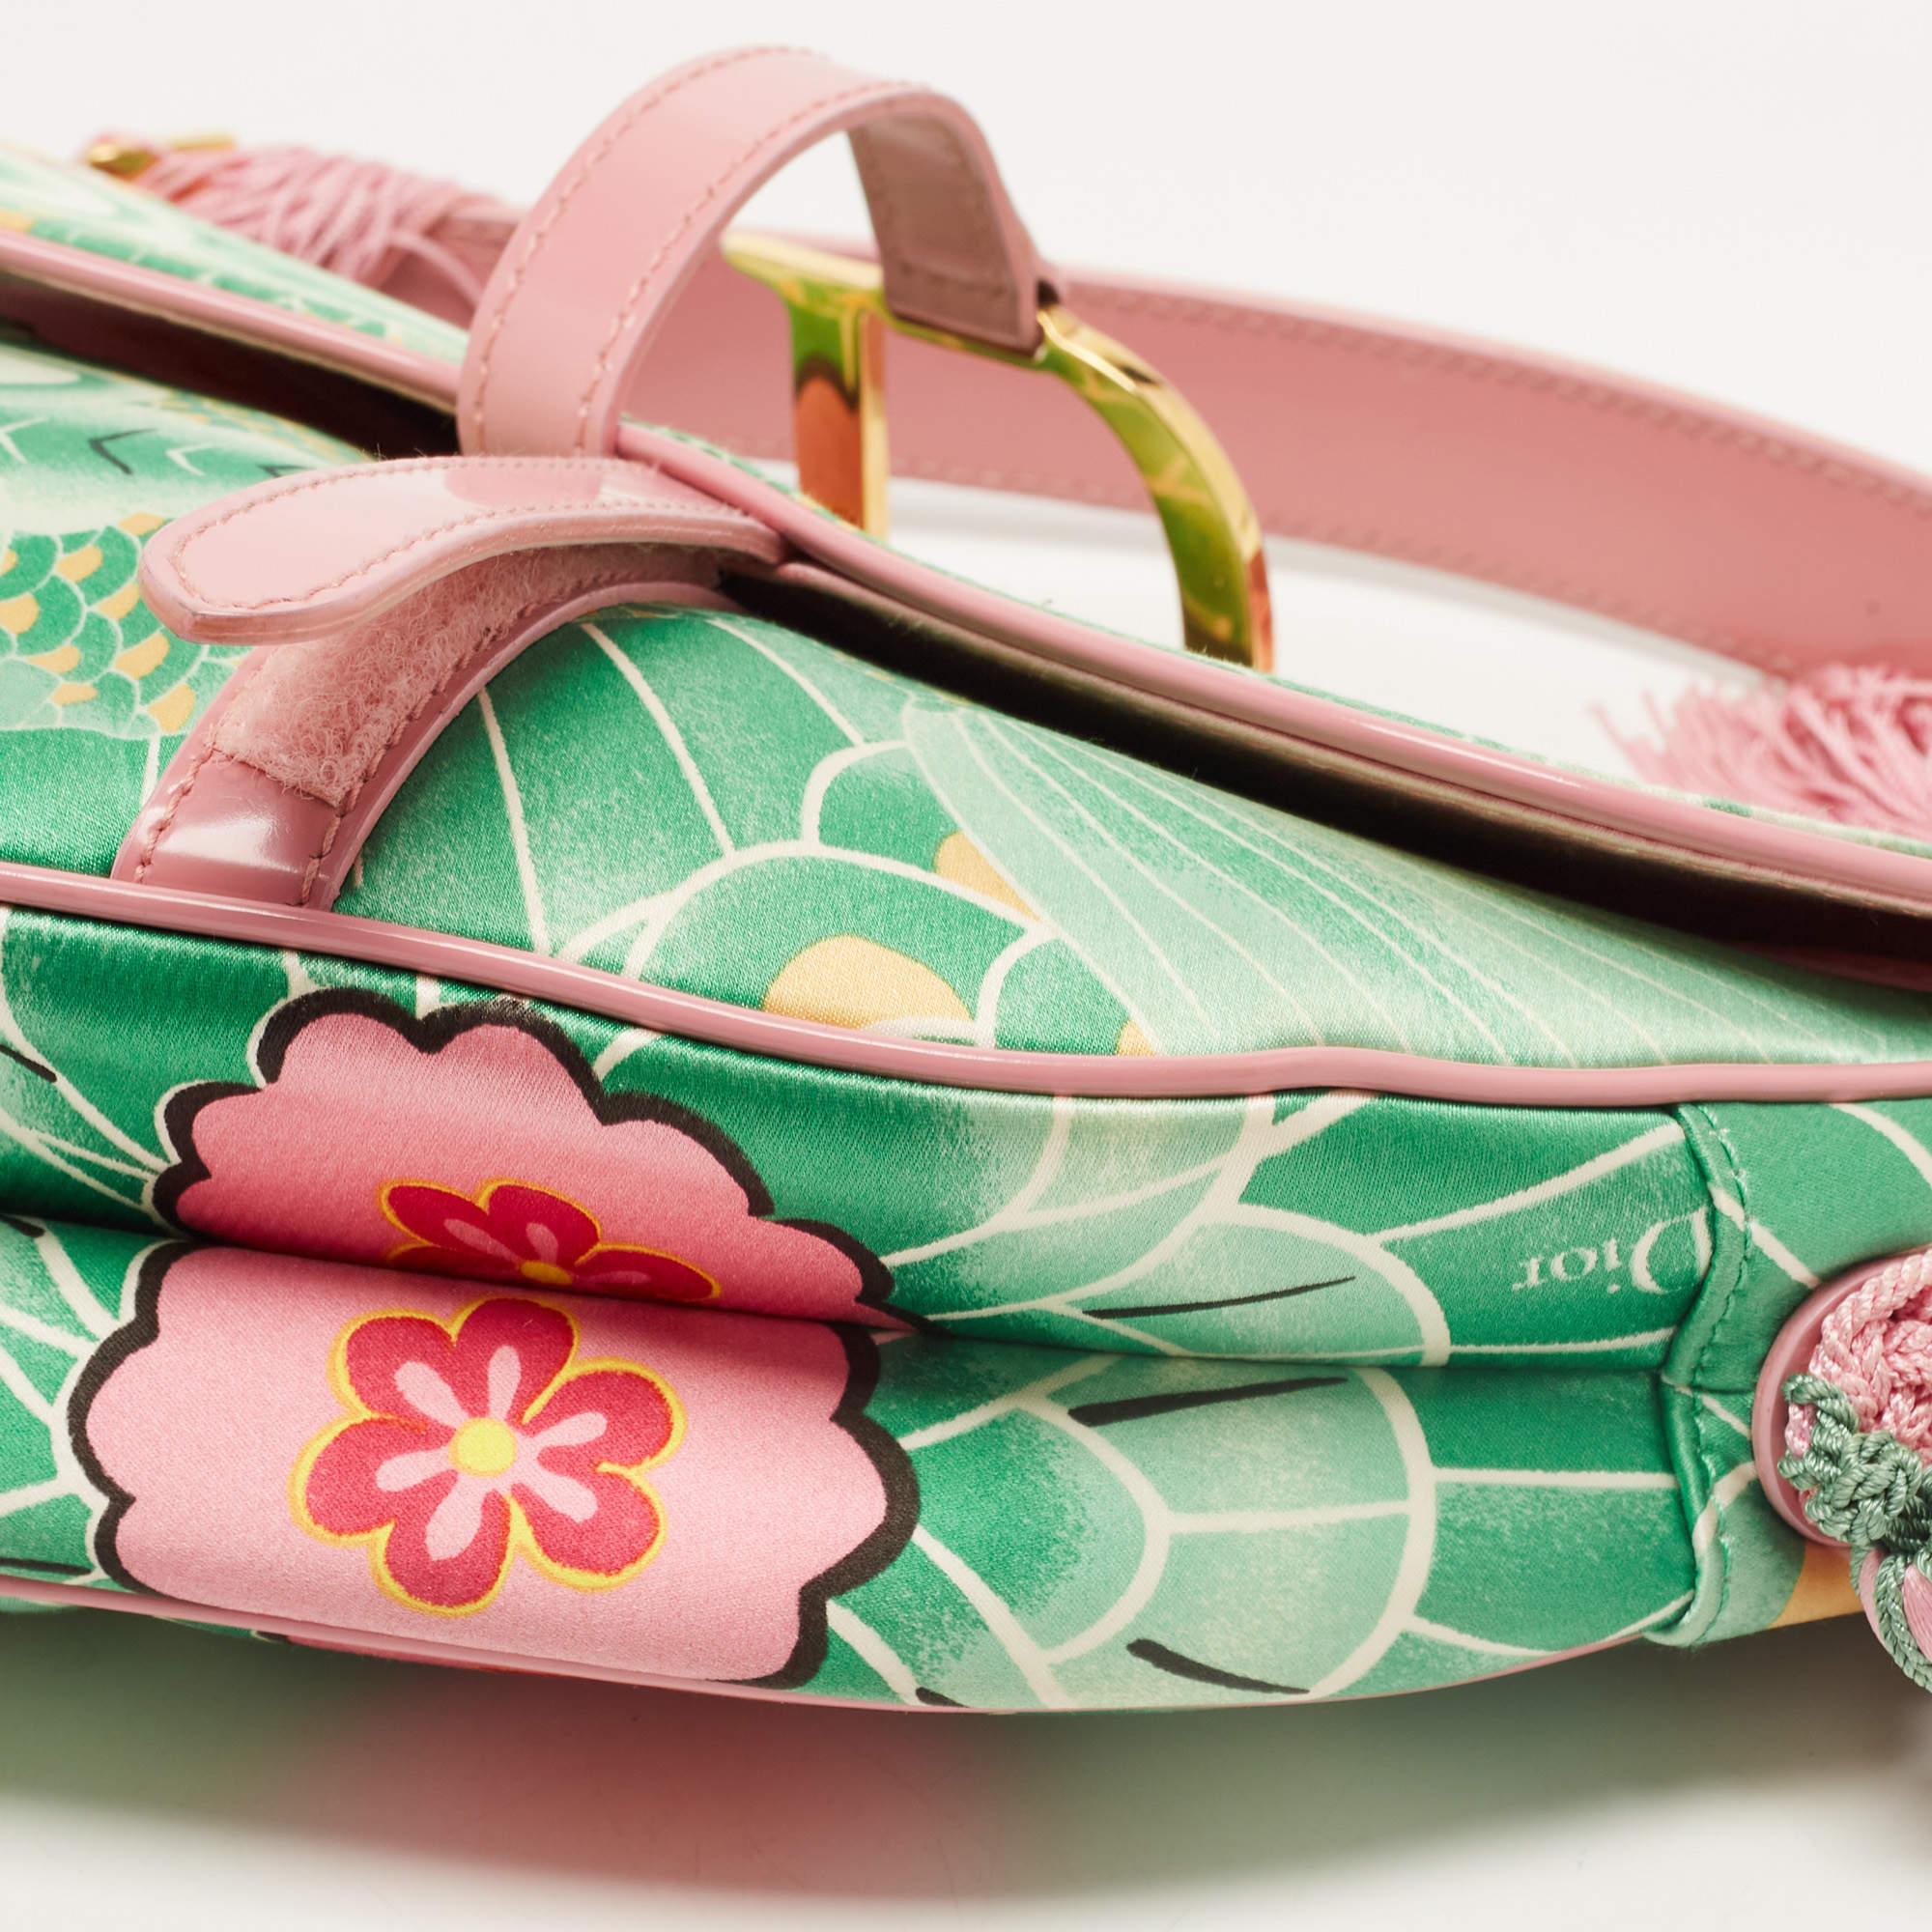 Dior Pink/Green Printed Satin and Glazed Leather Limited Edition 0705 Saddle Bag 6